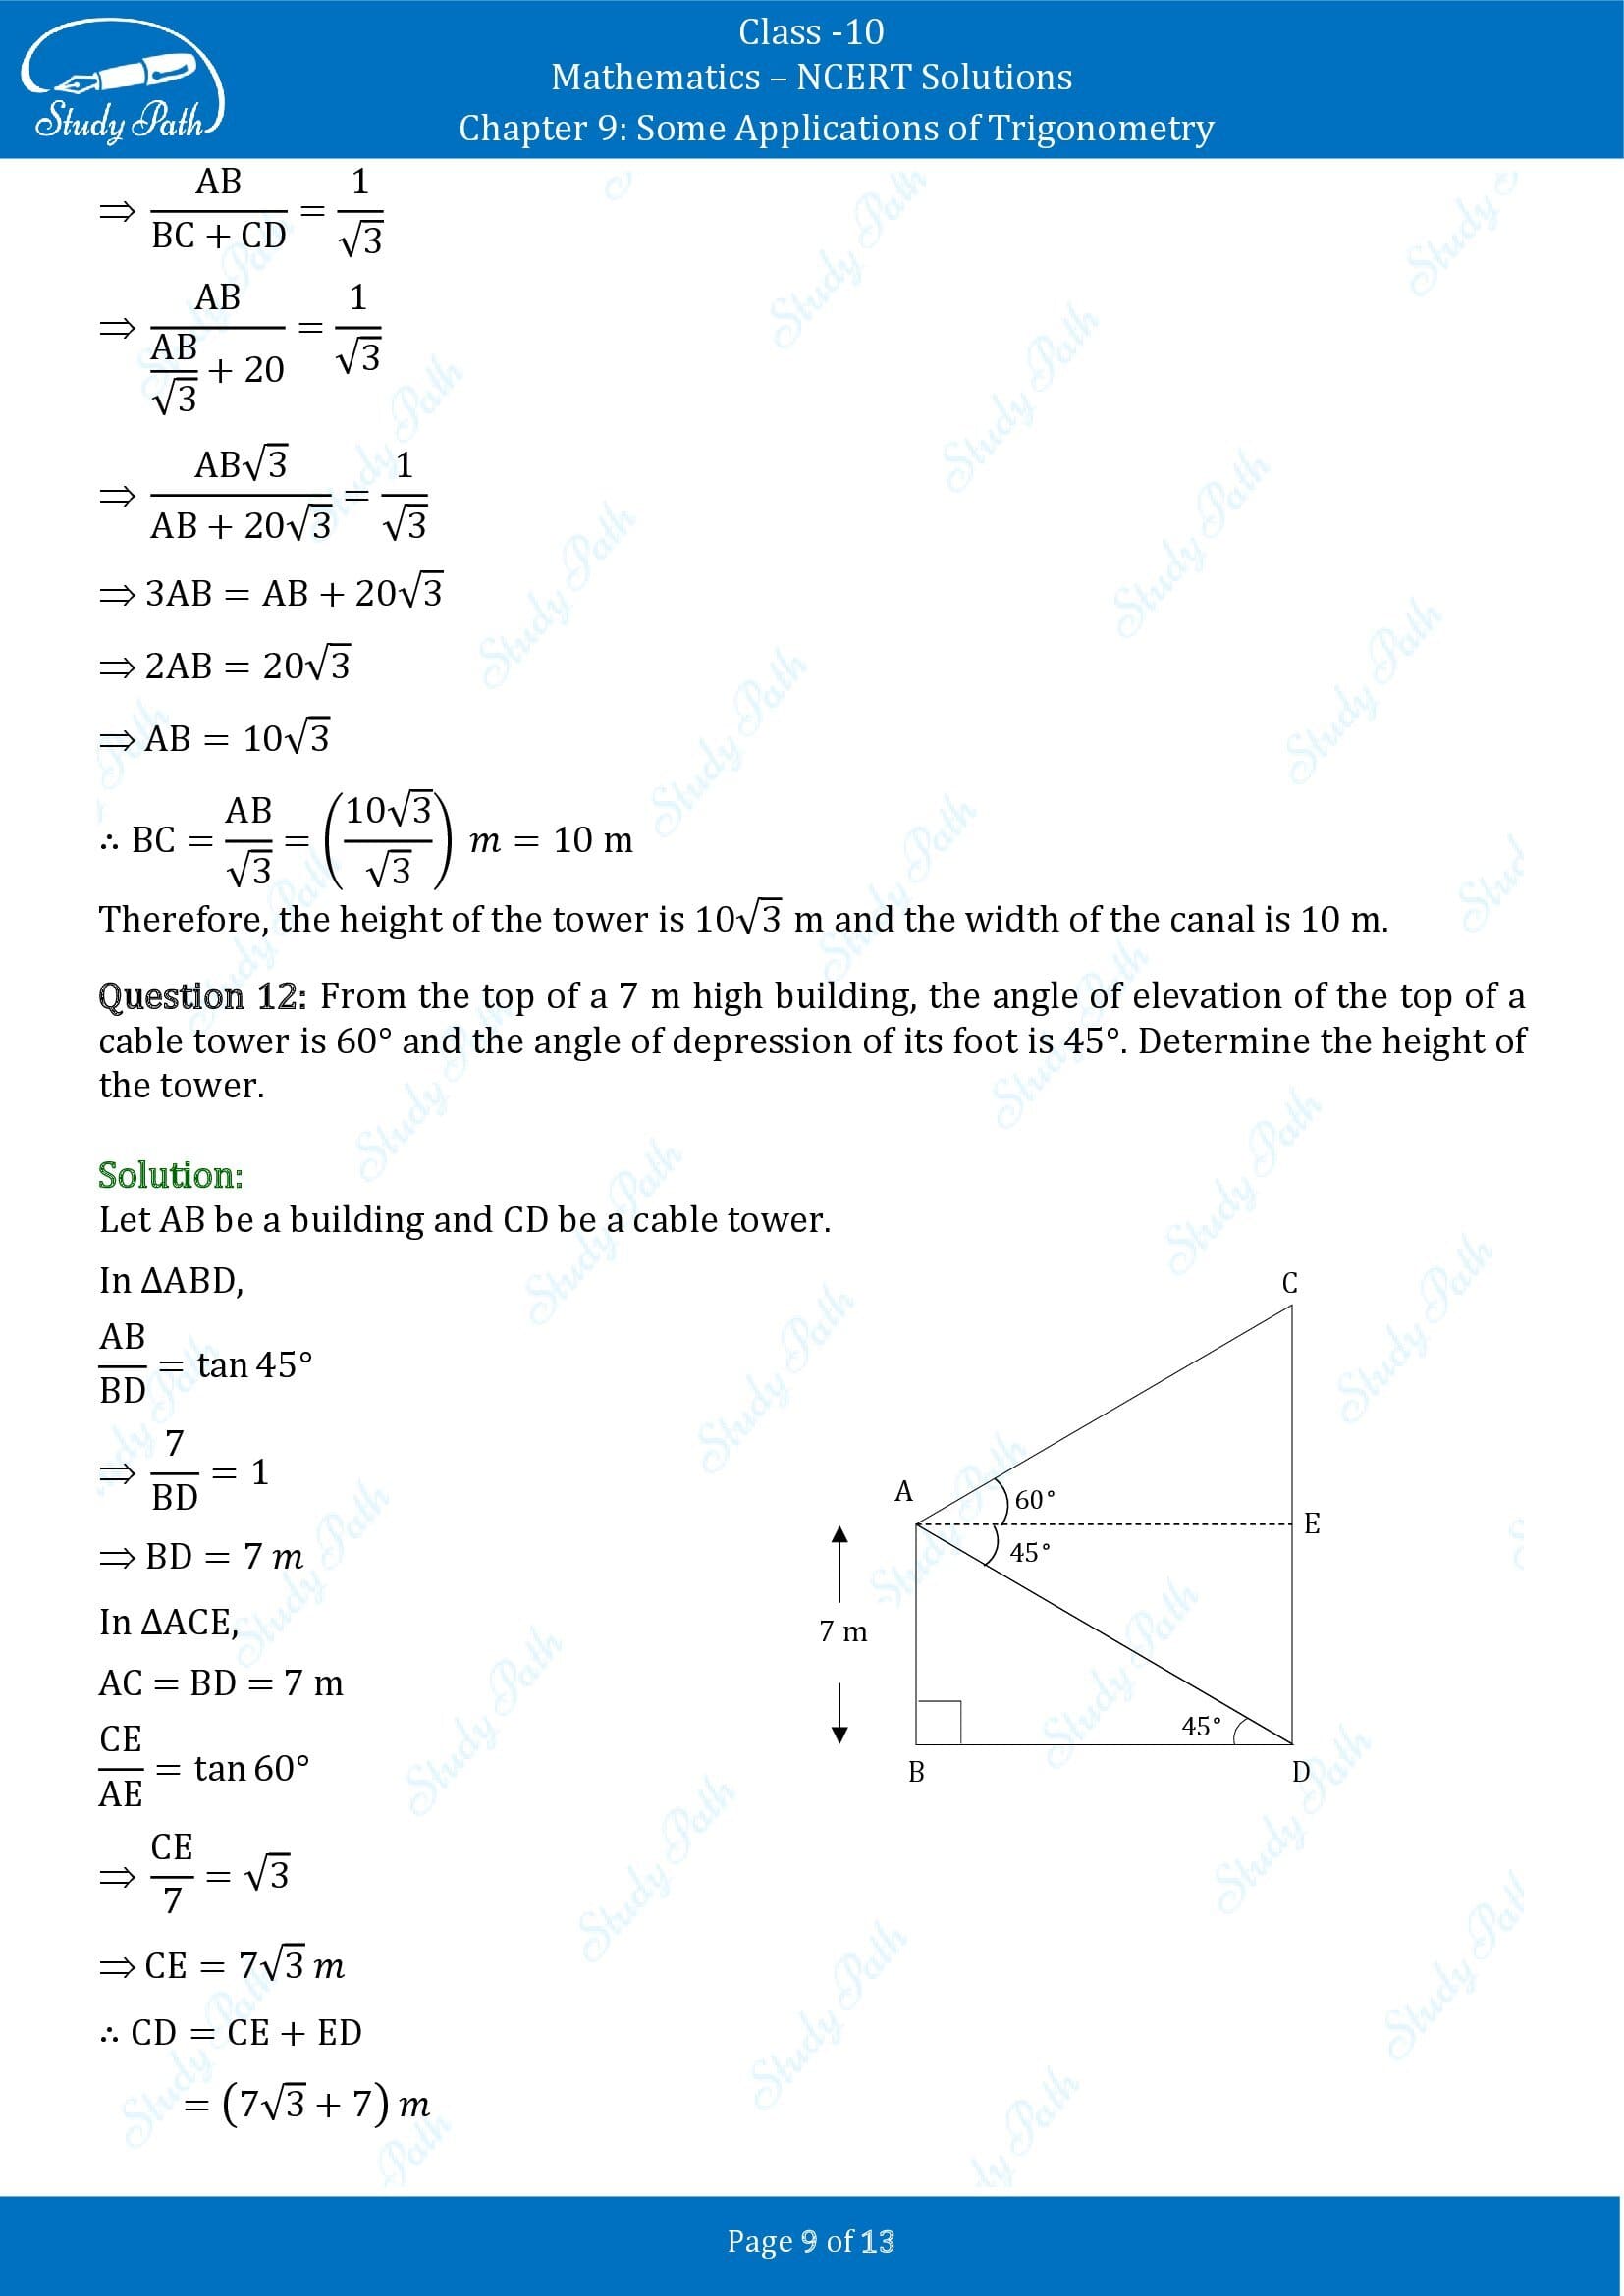 NCERT Solutions for Class 10 Maths Chapter 9 Some Applications of Trigonometry 00009